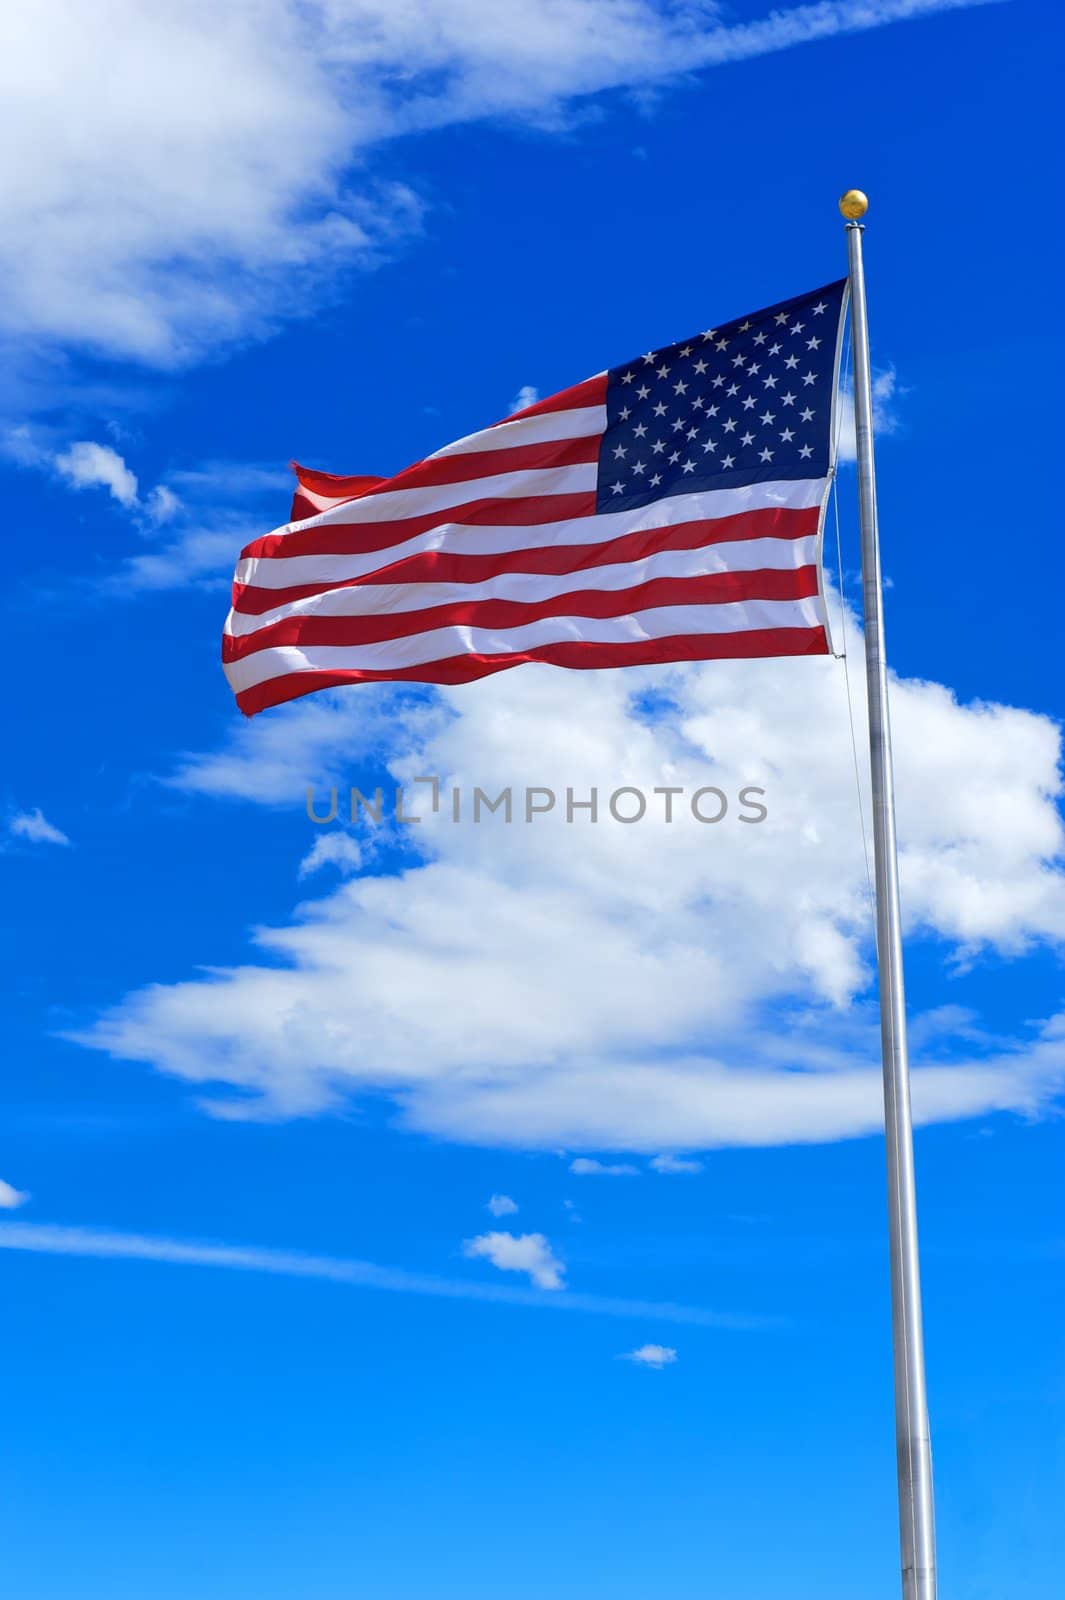 An American flag flapping proudly in the wind